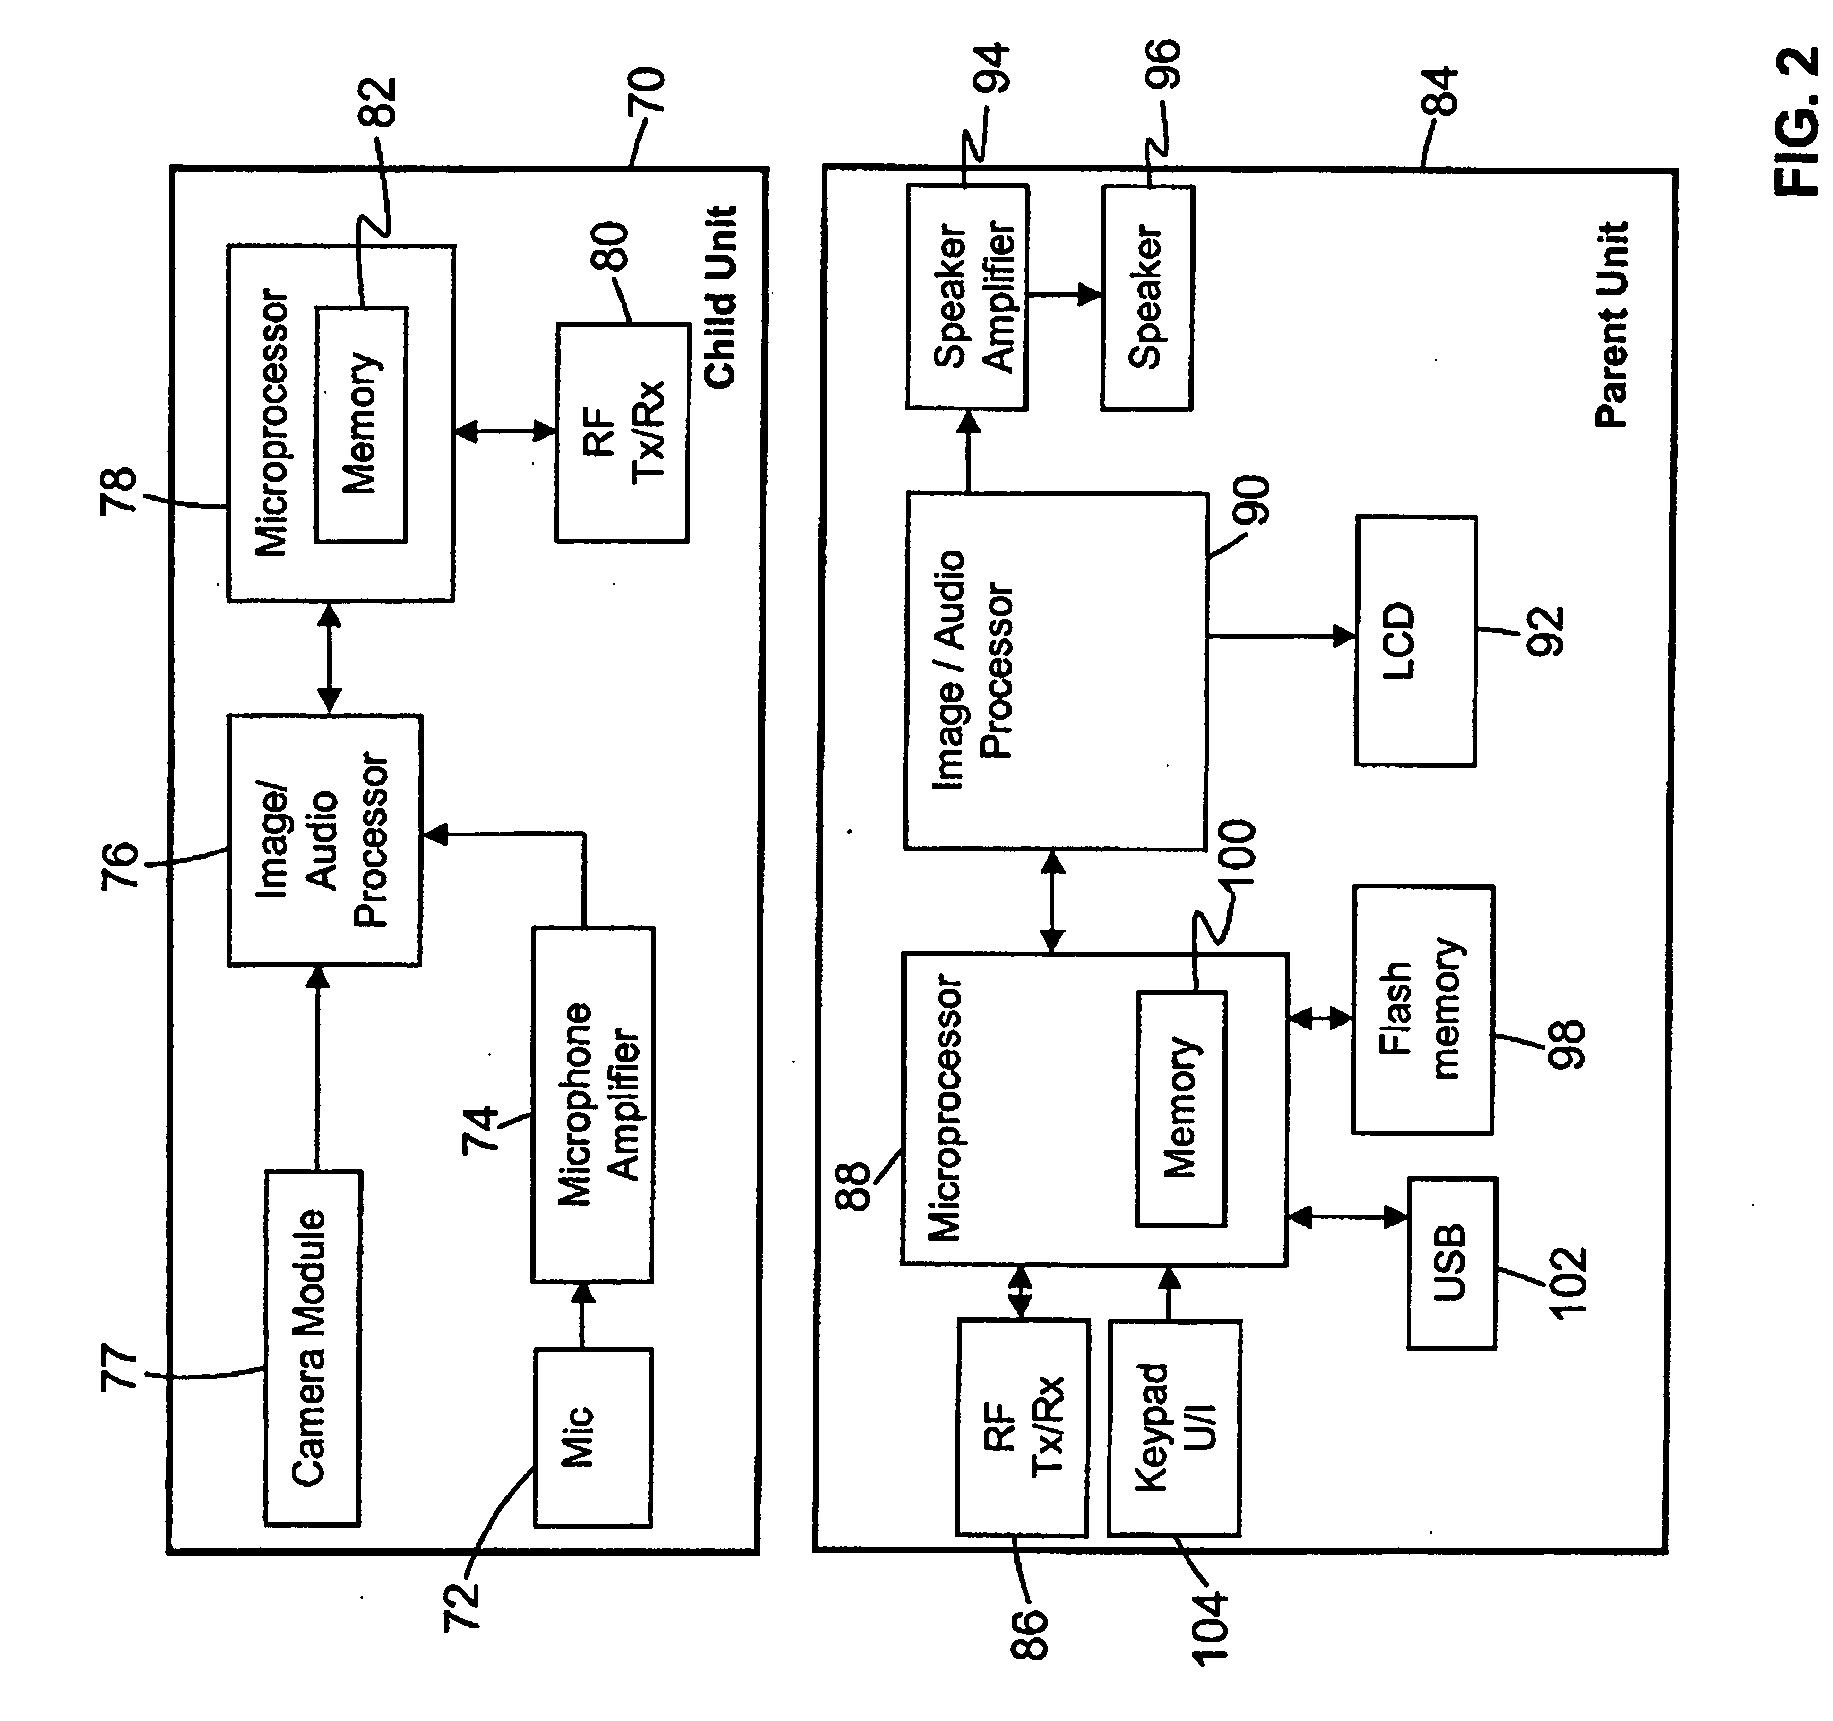 Child Monitor System with Content Data Storage